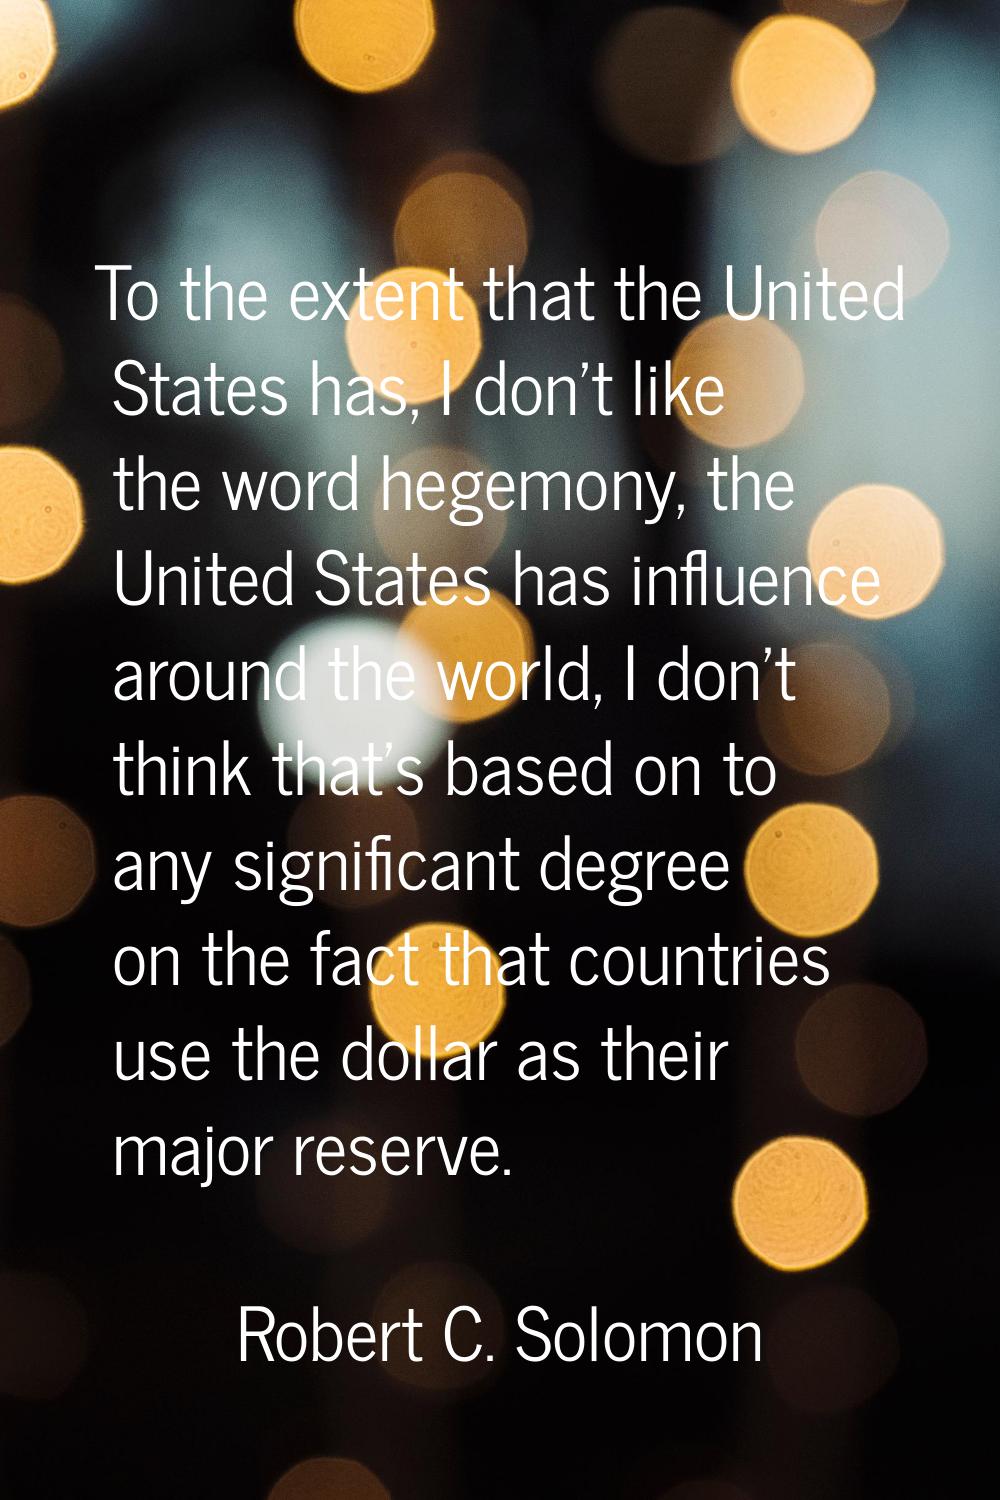 To the extent that the United States has, I don't like the word hegemony, the United States has inf